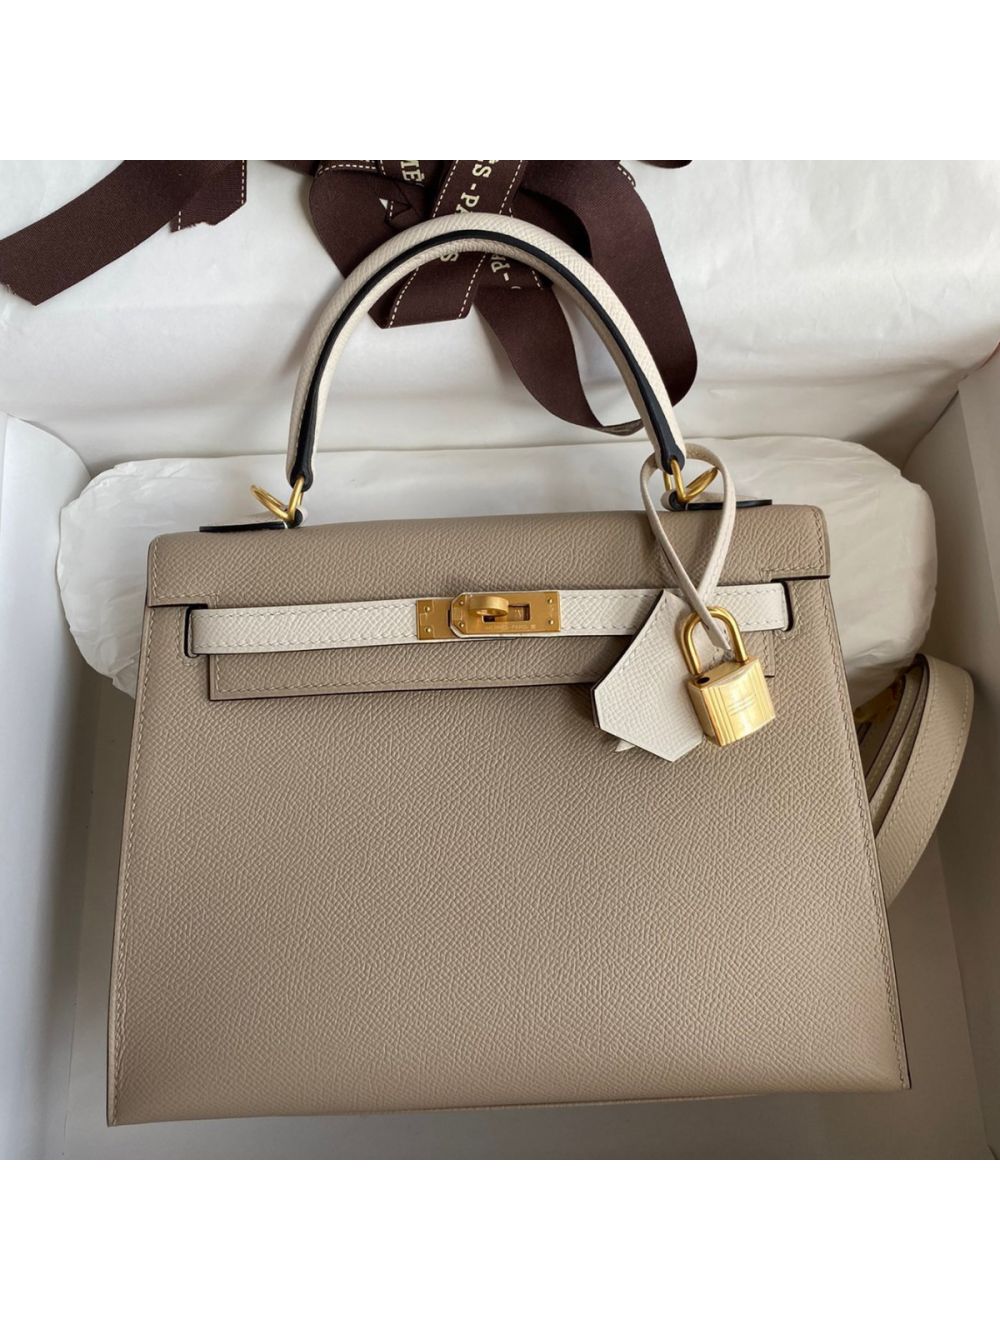 Replica Hermes Bolide 31 Handmade Bag In Taupe Clemence Leather